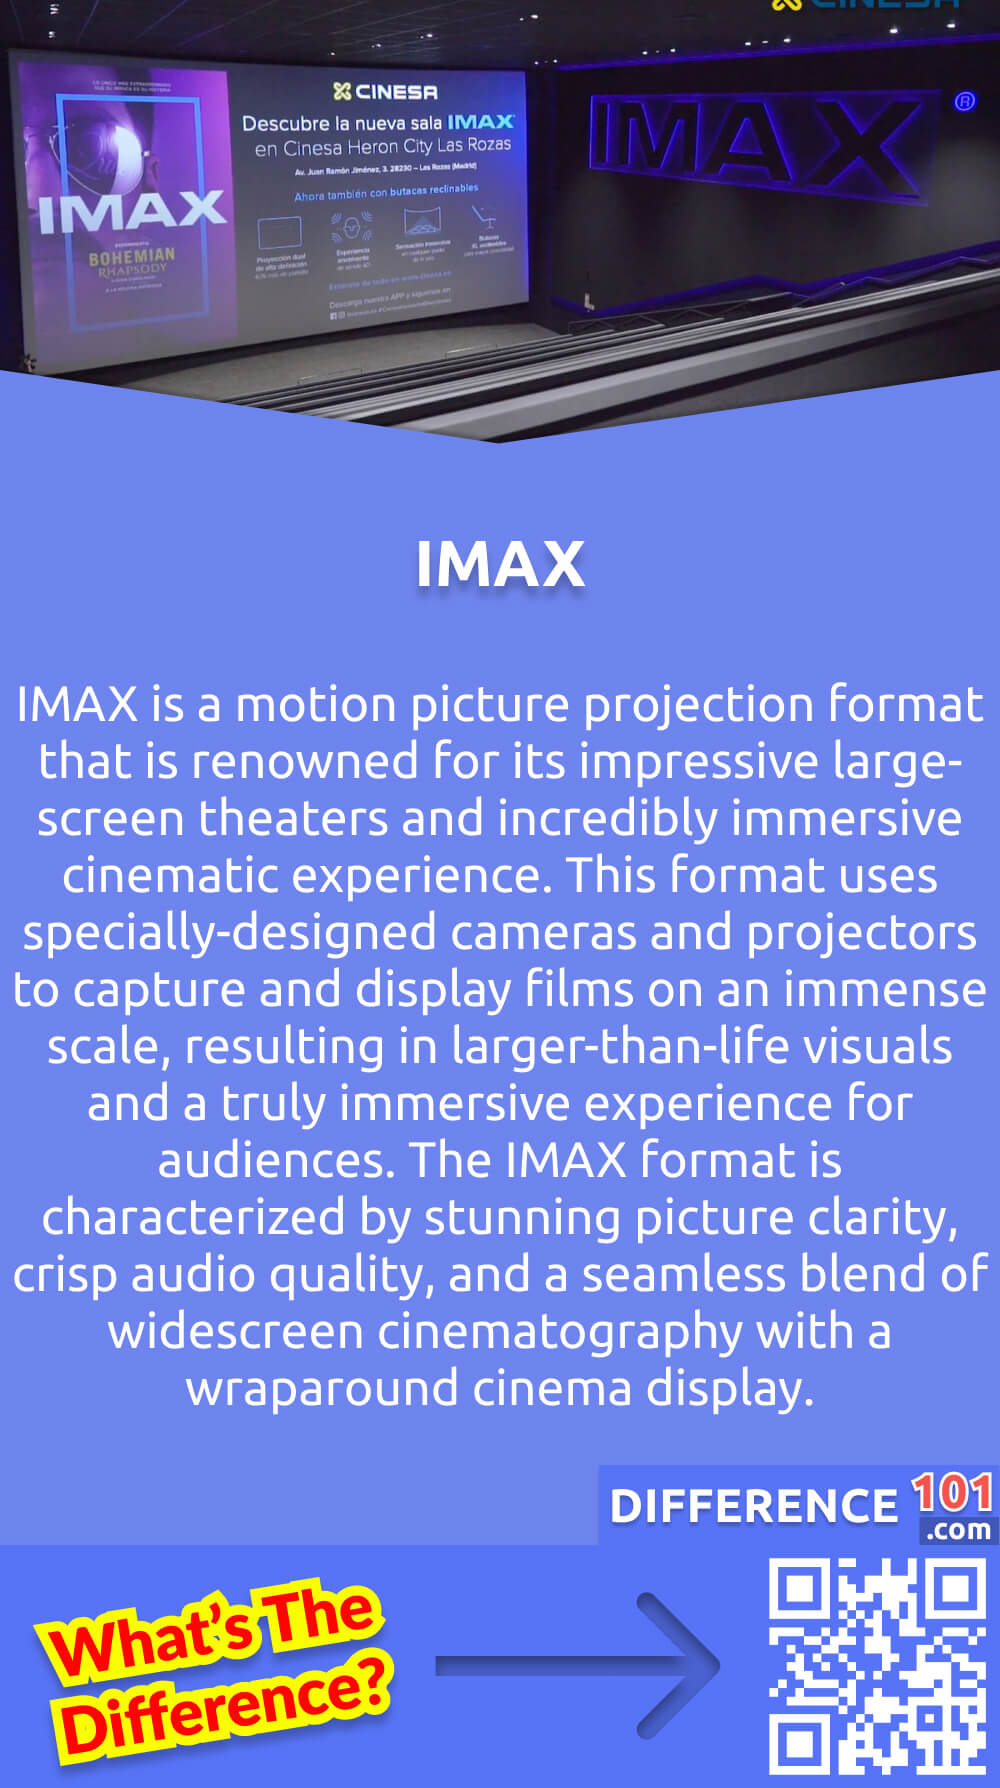 What Is IMAX? IMAX is a motion picture projection format that is renowned for its impressive large-screen theaters and incredibly immersive cinematic experience. This format uses specially-designed cameras and projectors to capture and display films on an immense scale, resulting in larger-than-life visuals and a truly immersive experience for audiences. The IMAX format is characterized by stunning picture clarity, crisp audio quality, and a seamless blend of widescreen cinematography with a wraparound cinema display. IMAX theaters are particularly well-suited for action-packed films, nature documentaries, and visually stunning works of art that deserve to be seen in a truly epic setting. As a global leader in large-format entertainment, IMAX continues to push the limits of cinematic excellence and redefine how people perceive the art of film.